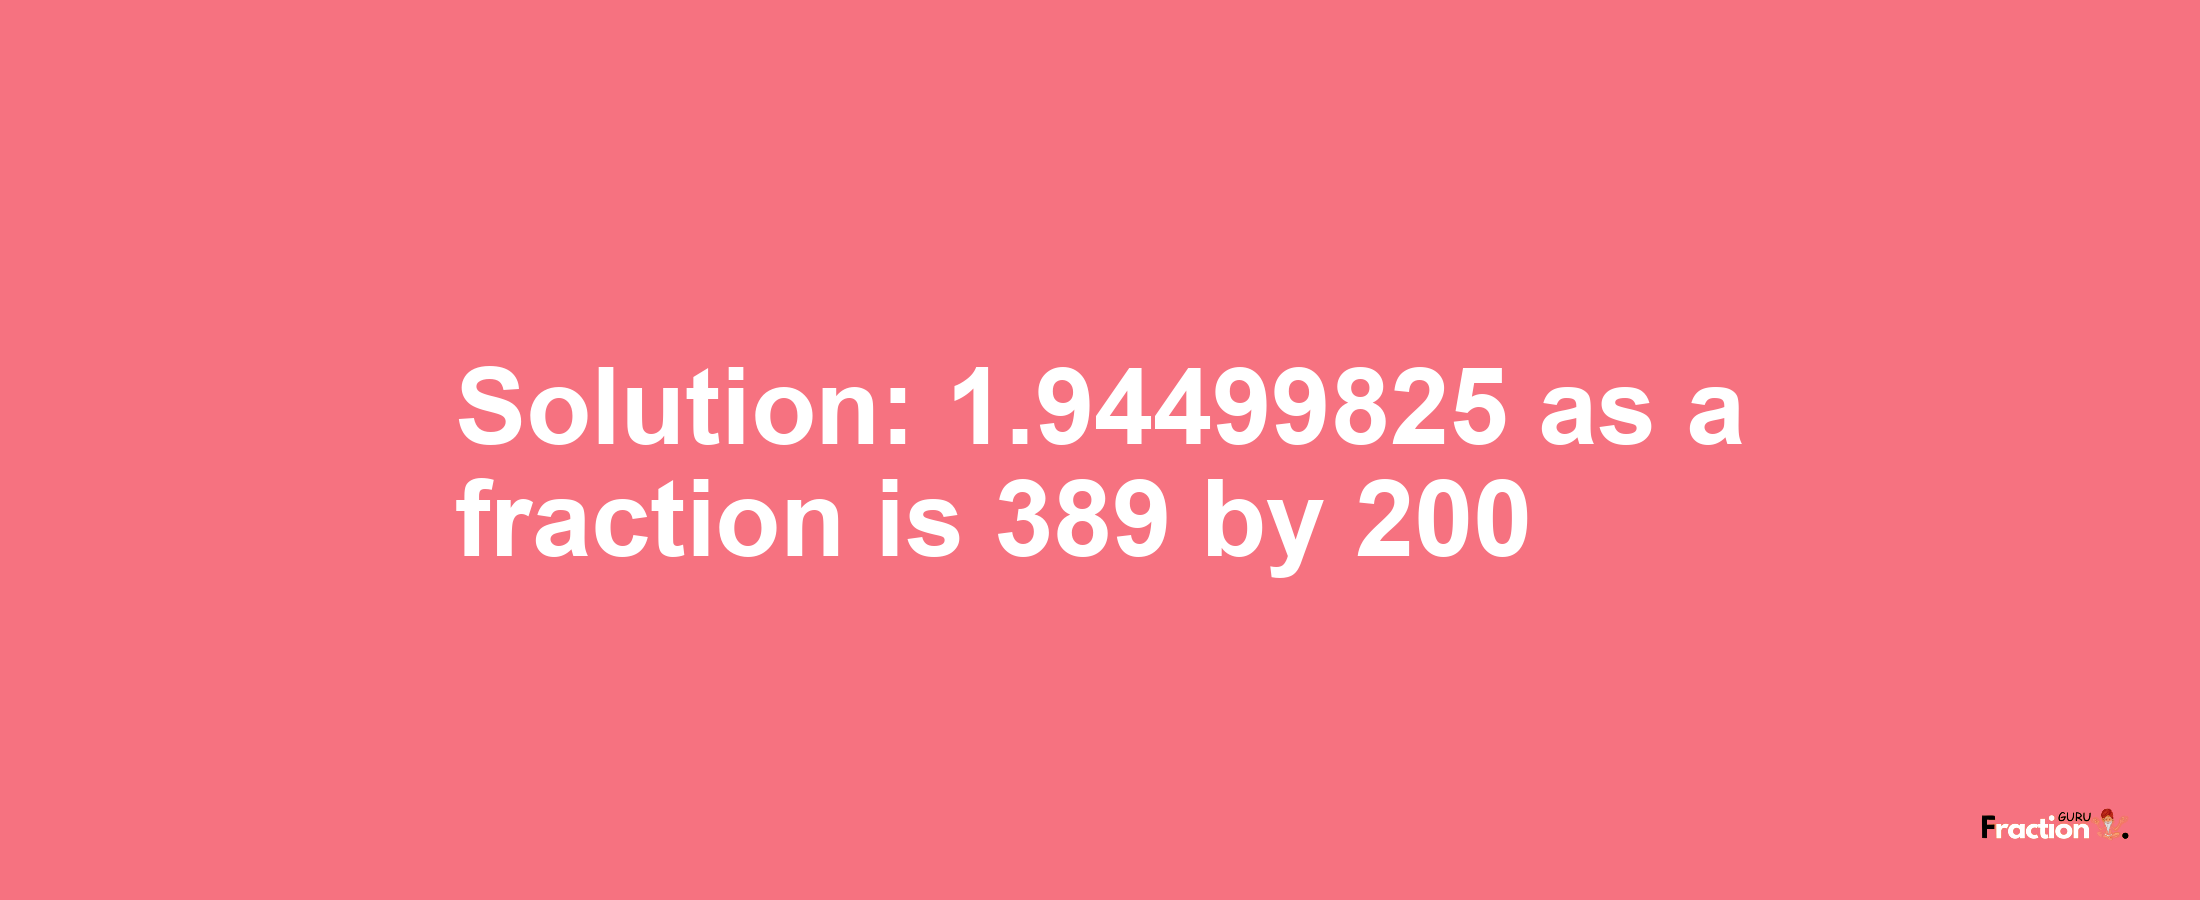 Solution:1.94499825 as a fraction is 389/200